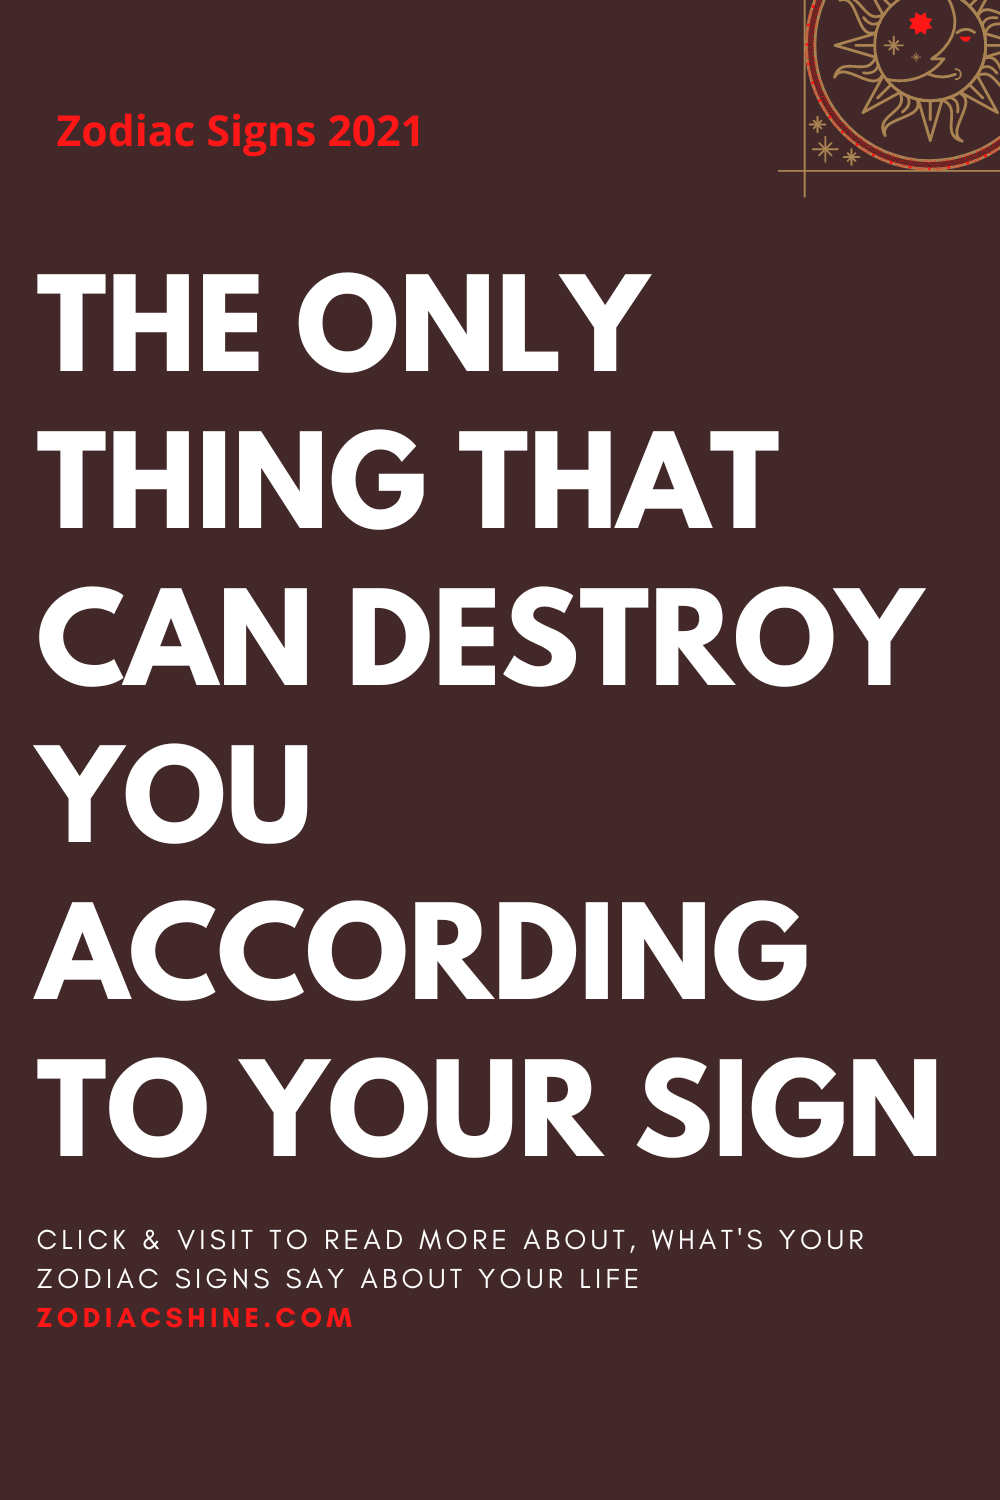 THE ONLY THING THAT CAN DESTROY YOU ACCORDING TO YOUR SIGN